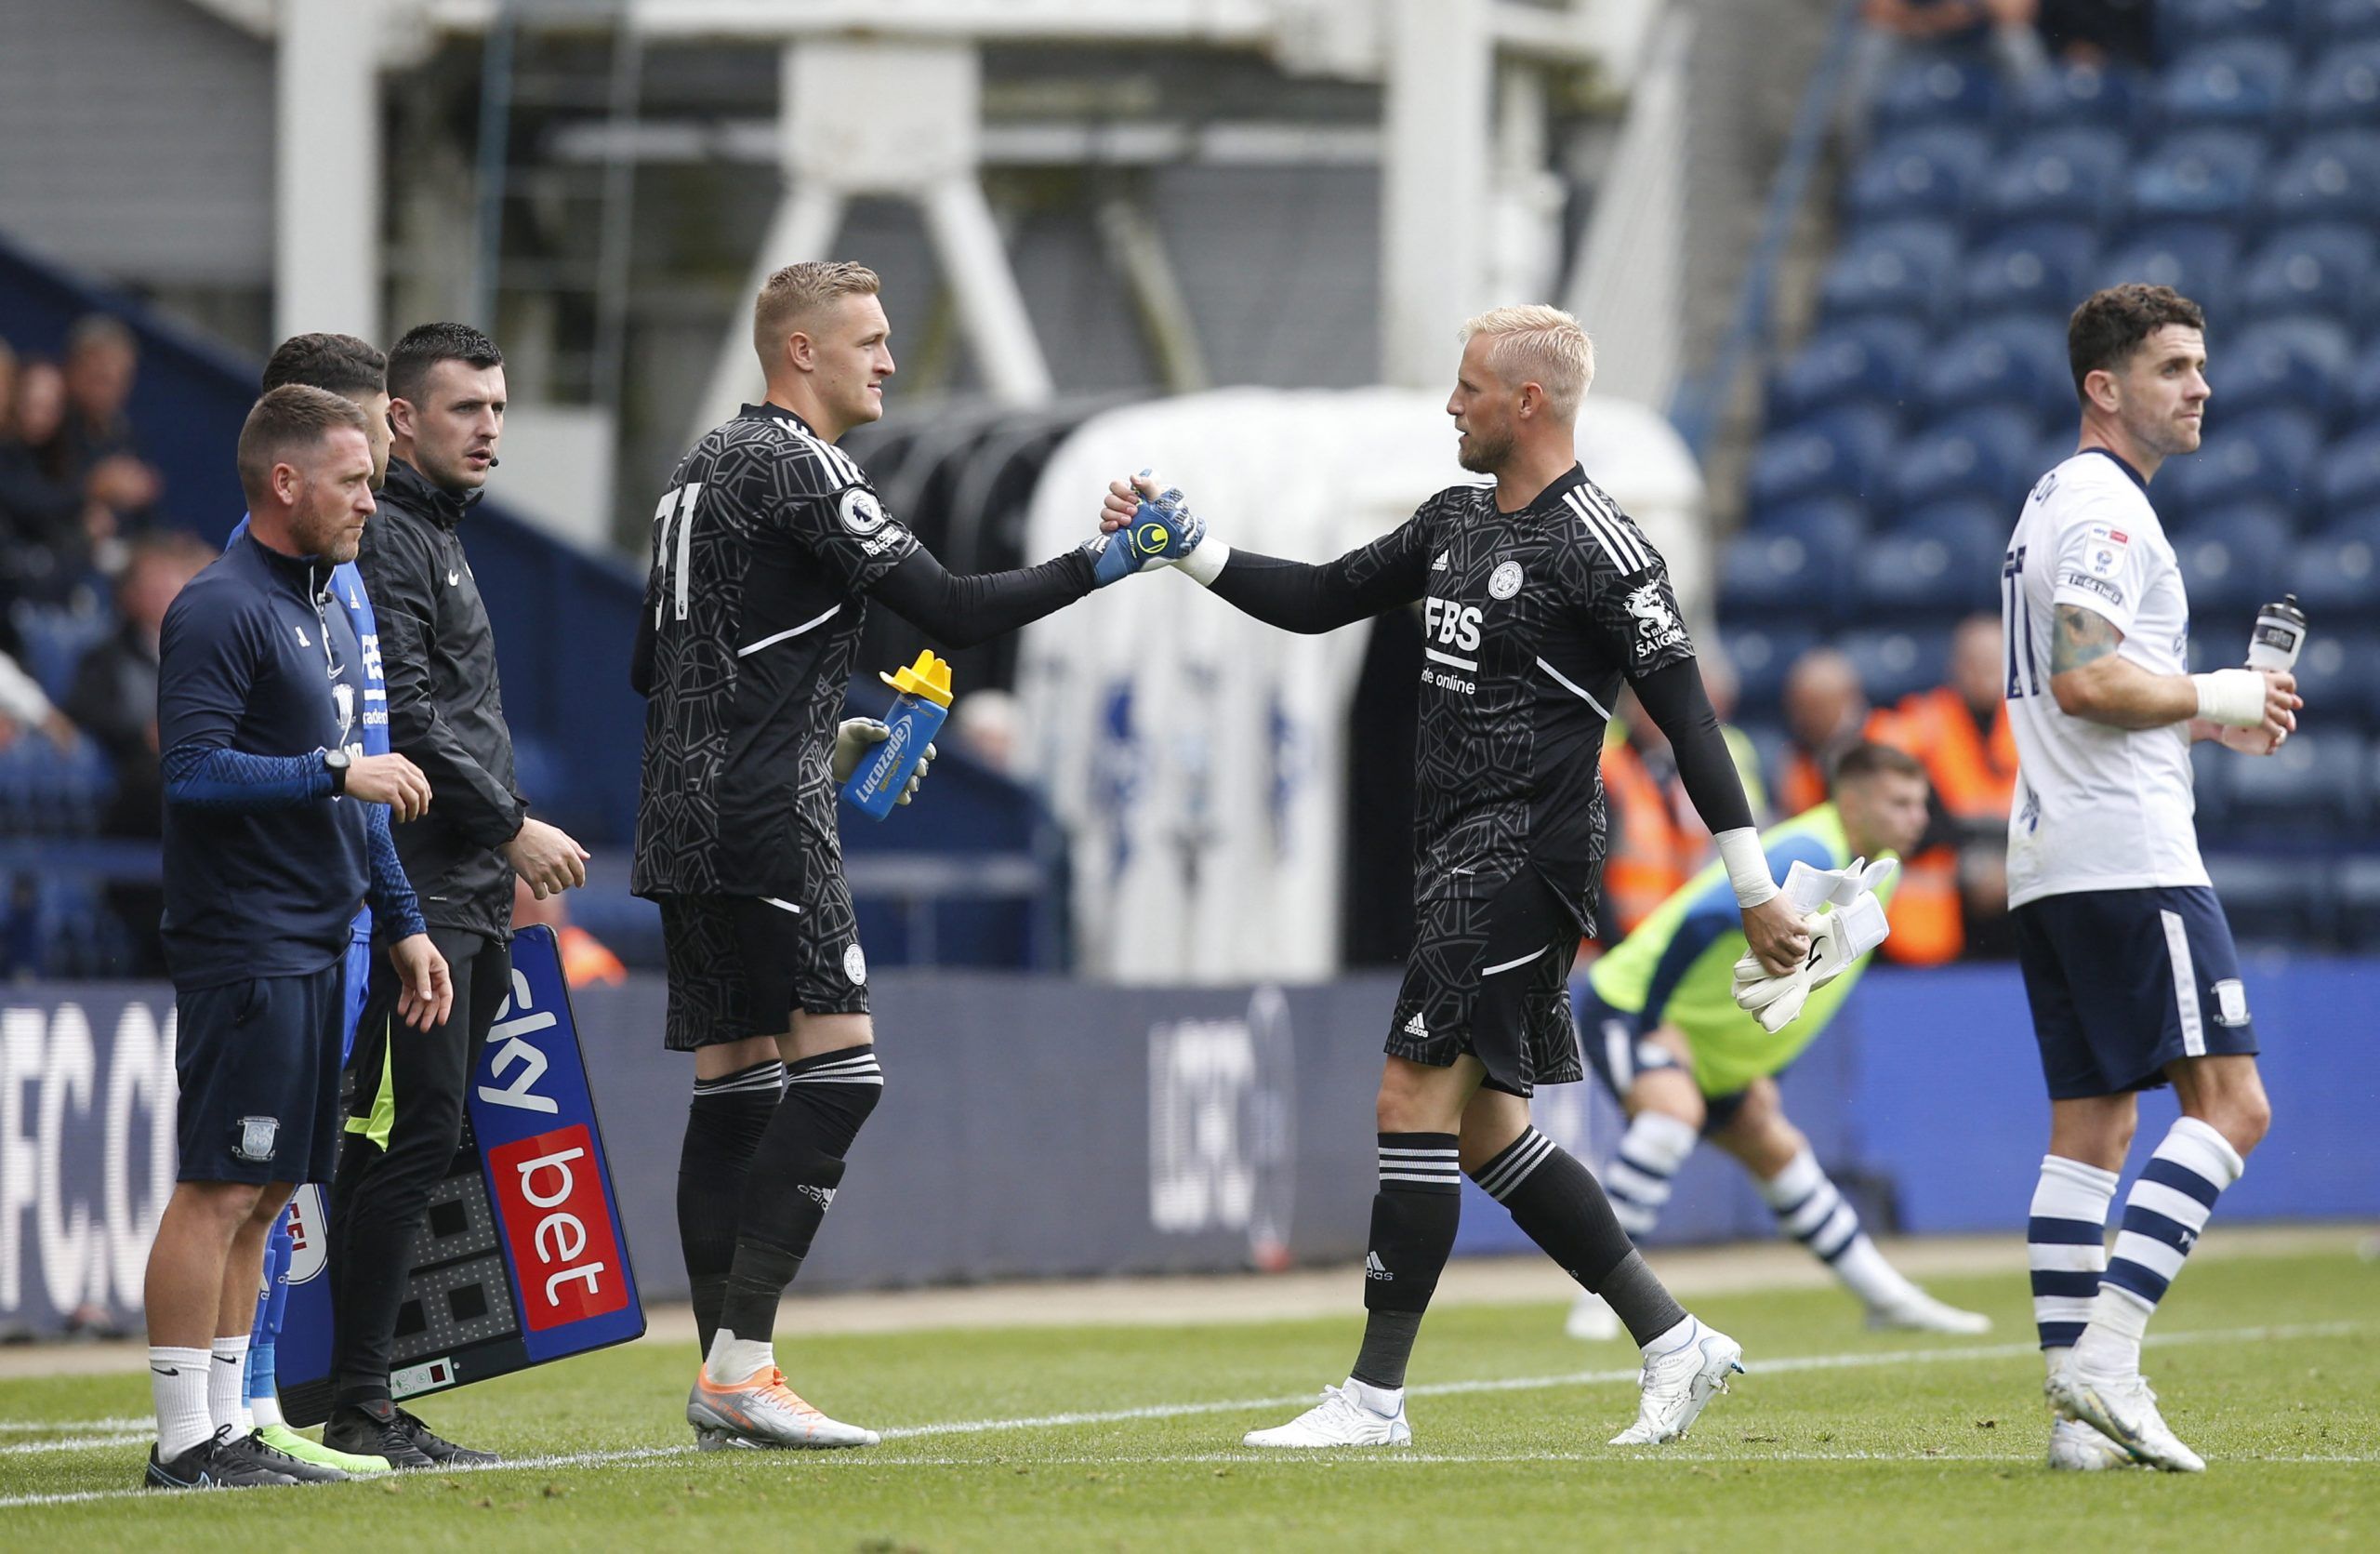 Soccer Football - Pre Season Friendly - Preston North End v Leicester City - Deepdale Stadium, Preston, Britain - July 23, 2022 Leicester City's Daniel Iversen comes on as a substitute to replace Kasper Schmeichel Action Images via Reuters/Ed Sykes